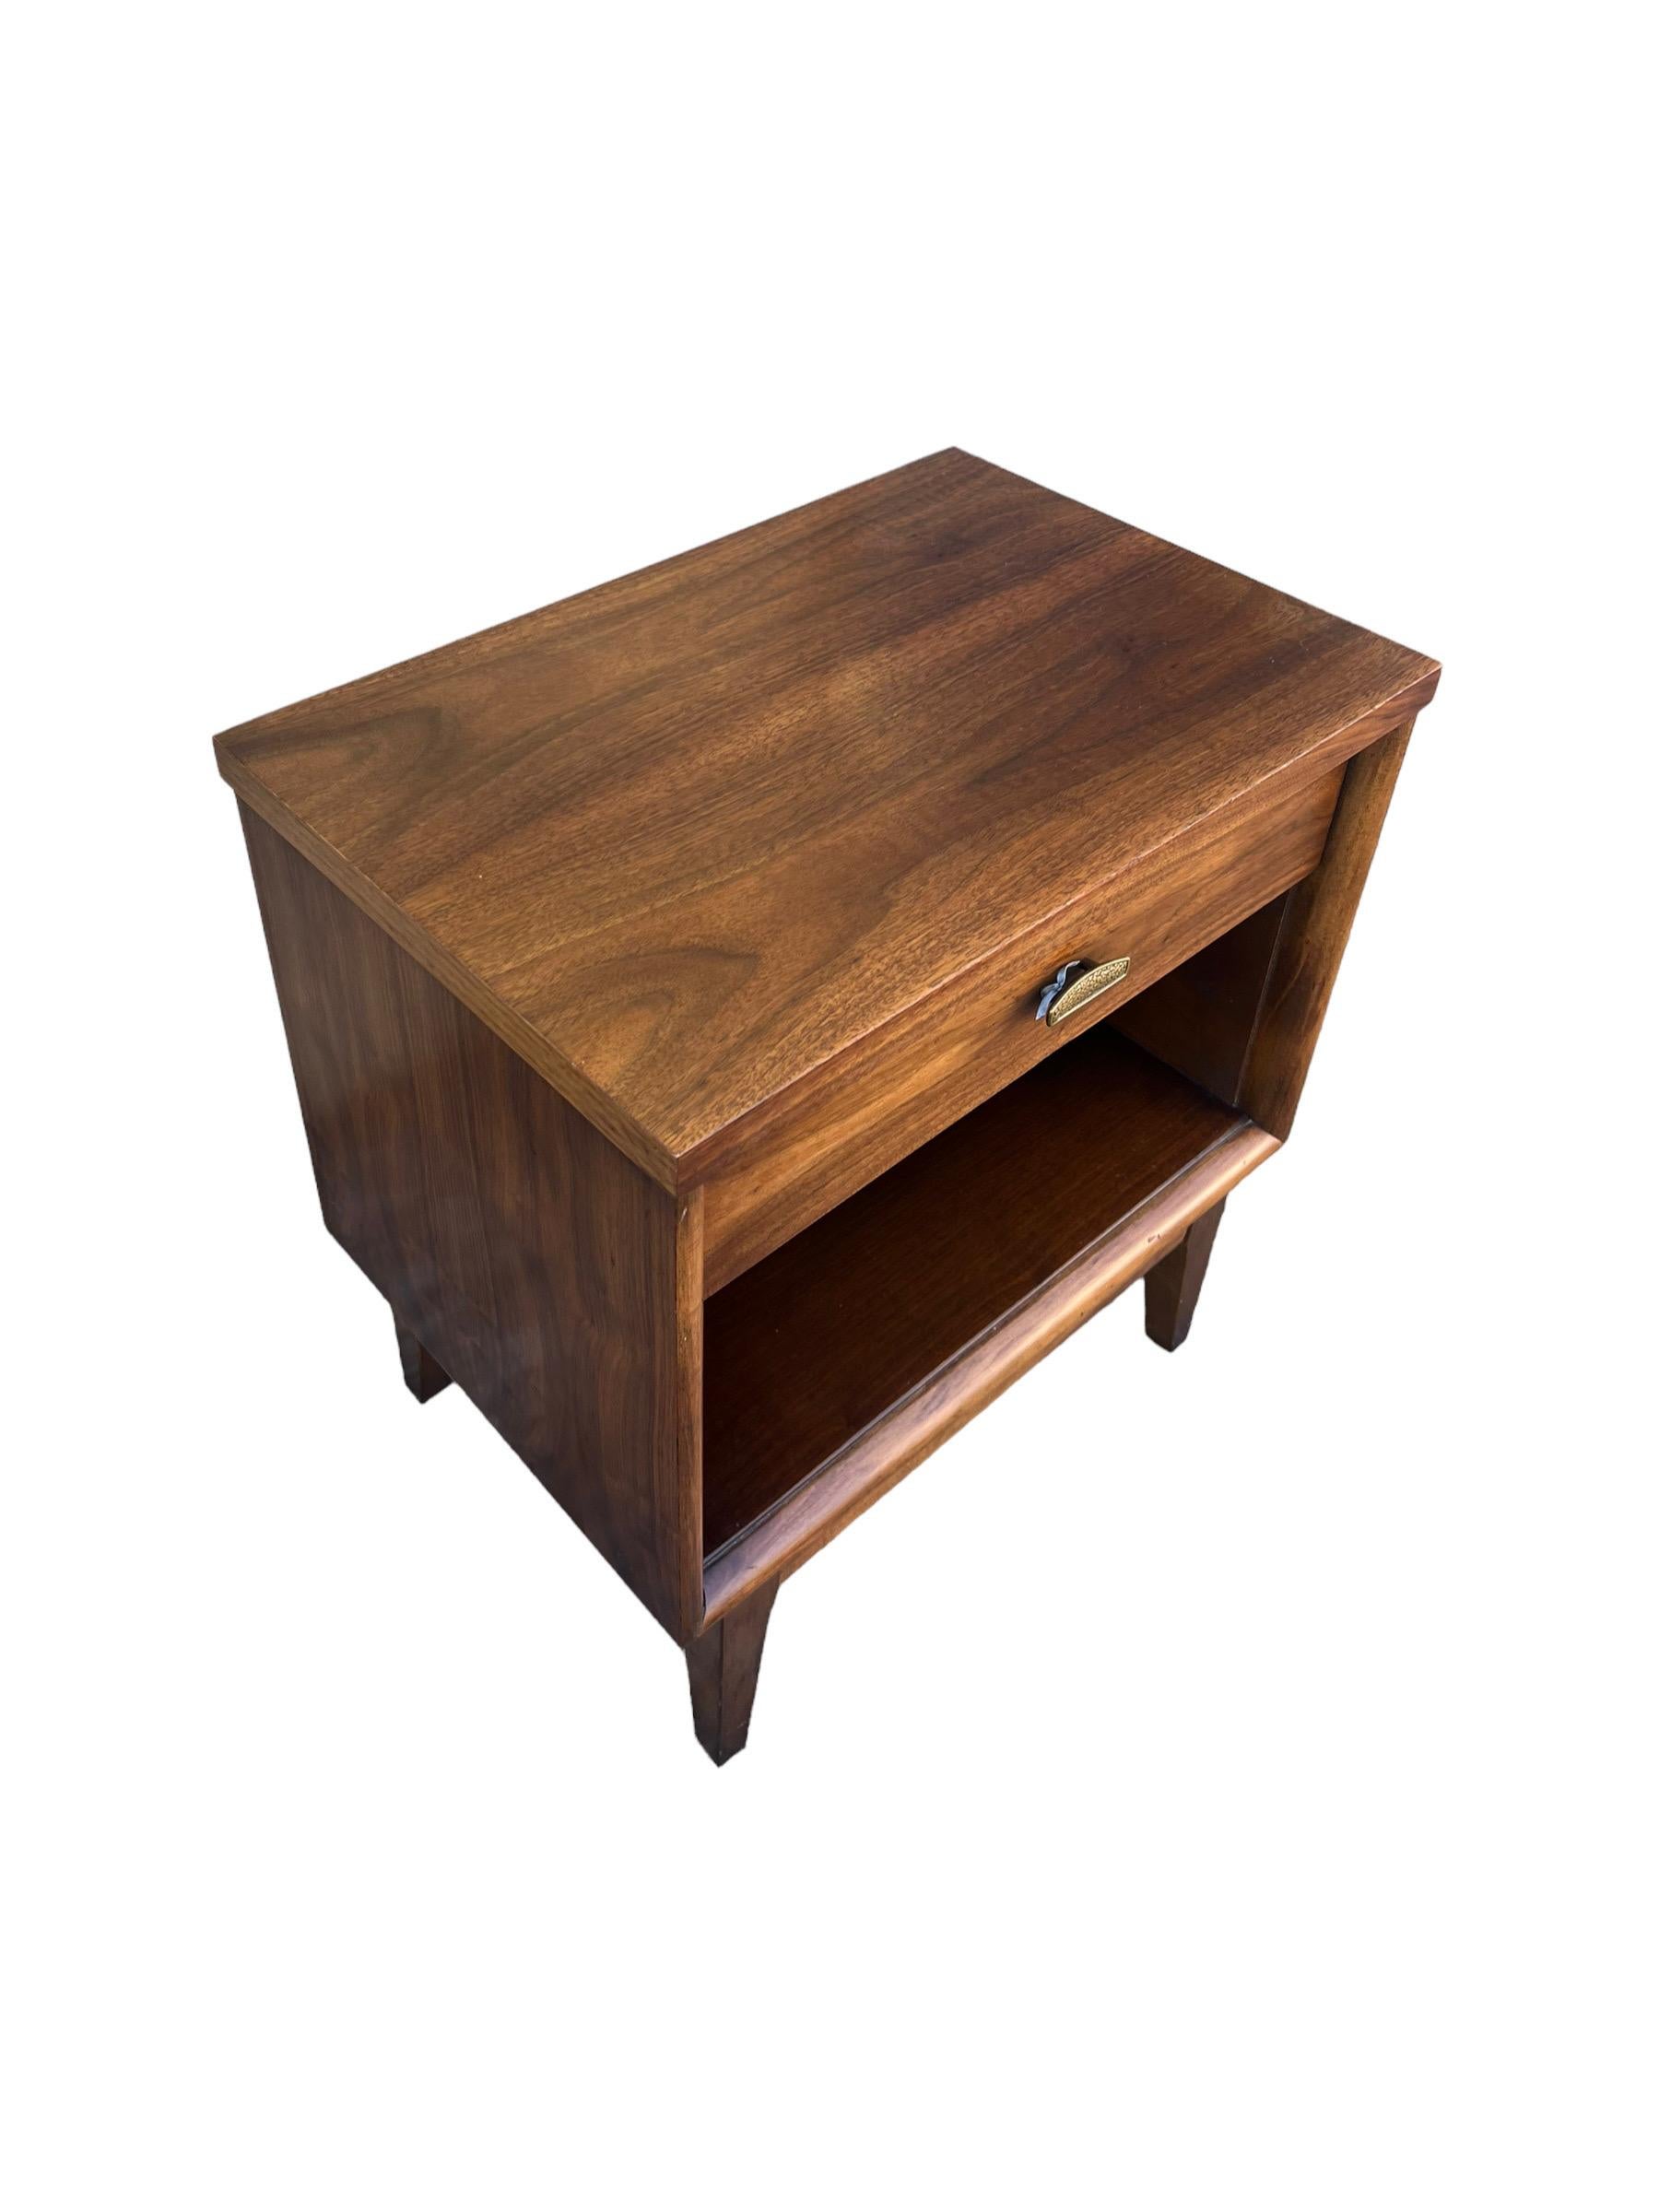 Late 20th Century Vintage Mid Century Modern Walnut Accent Table Stand Dovetail Drawer